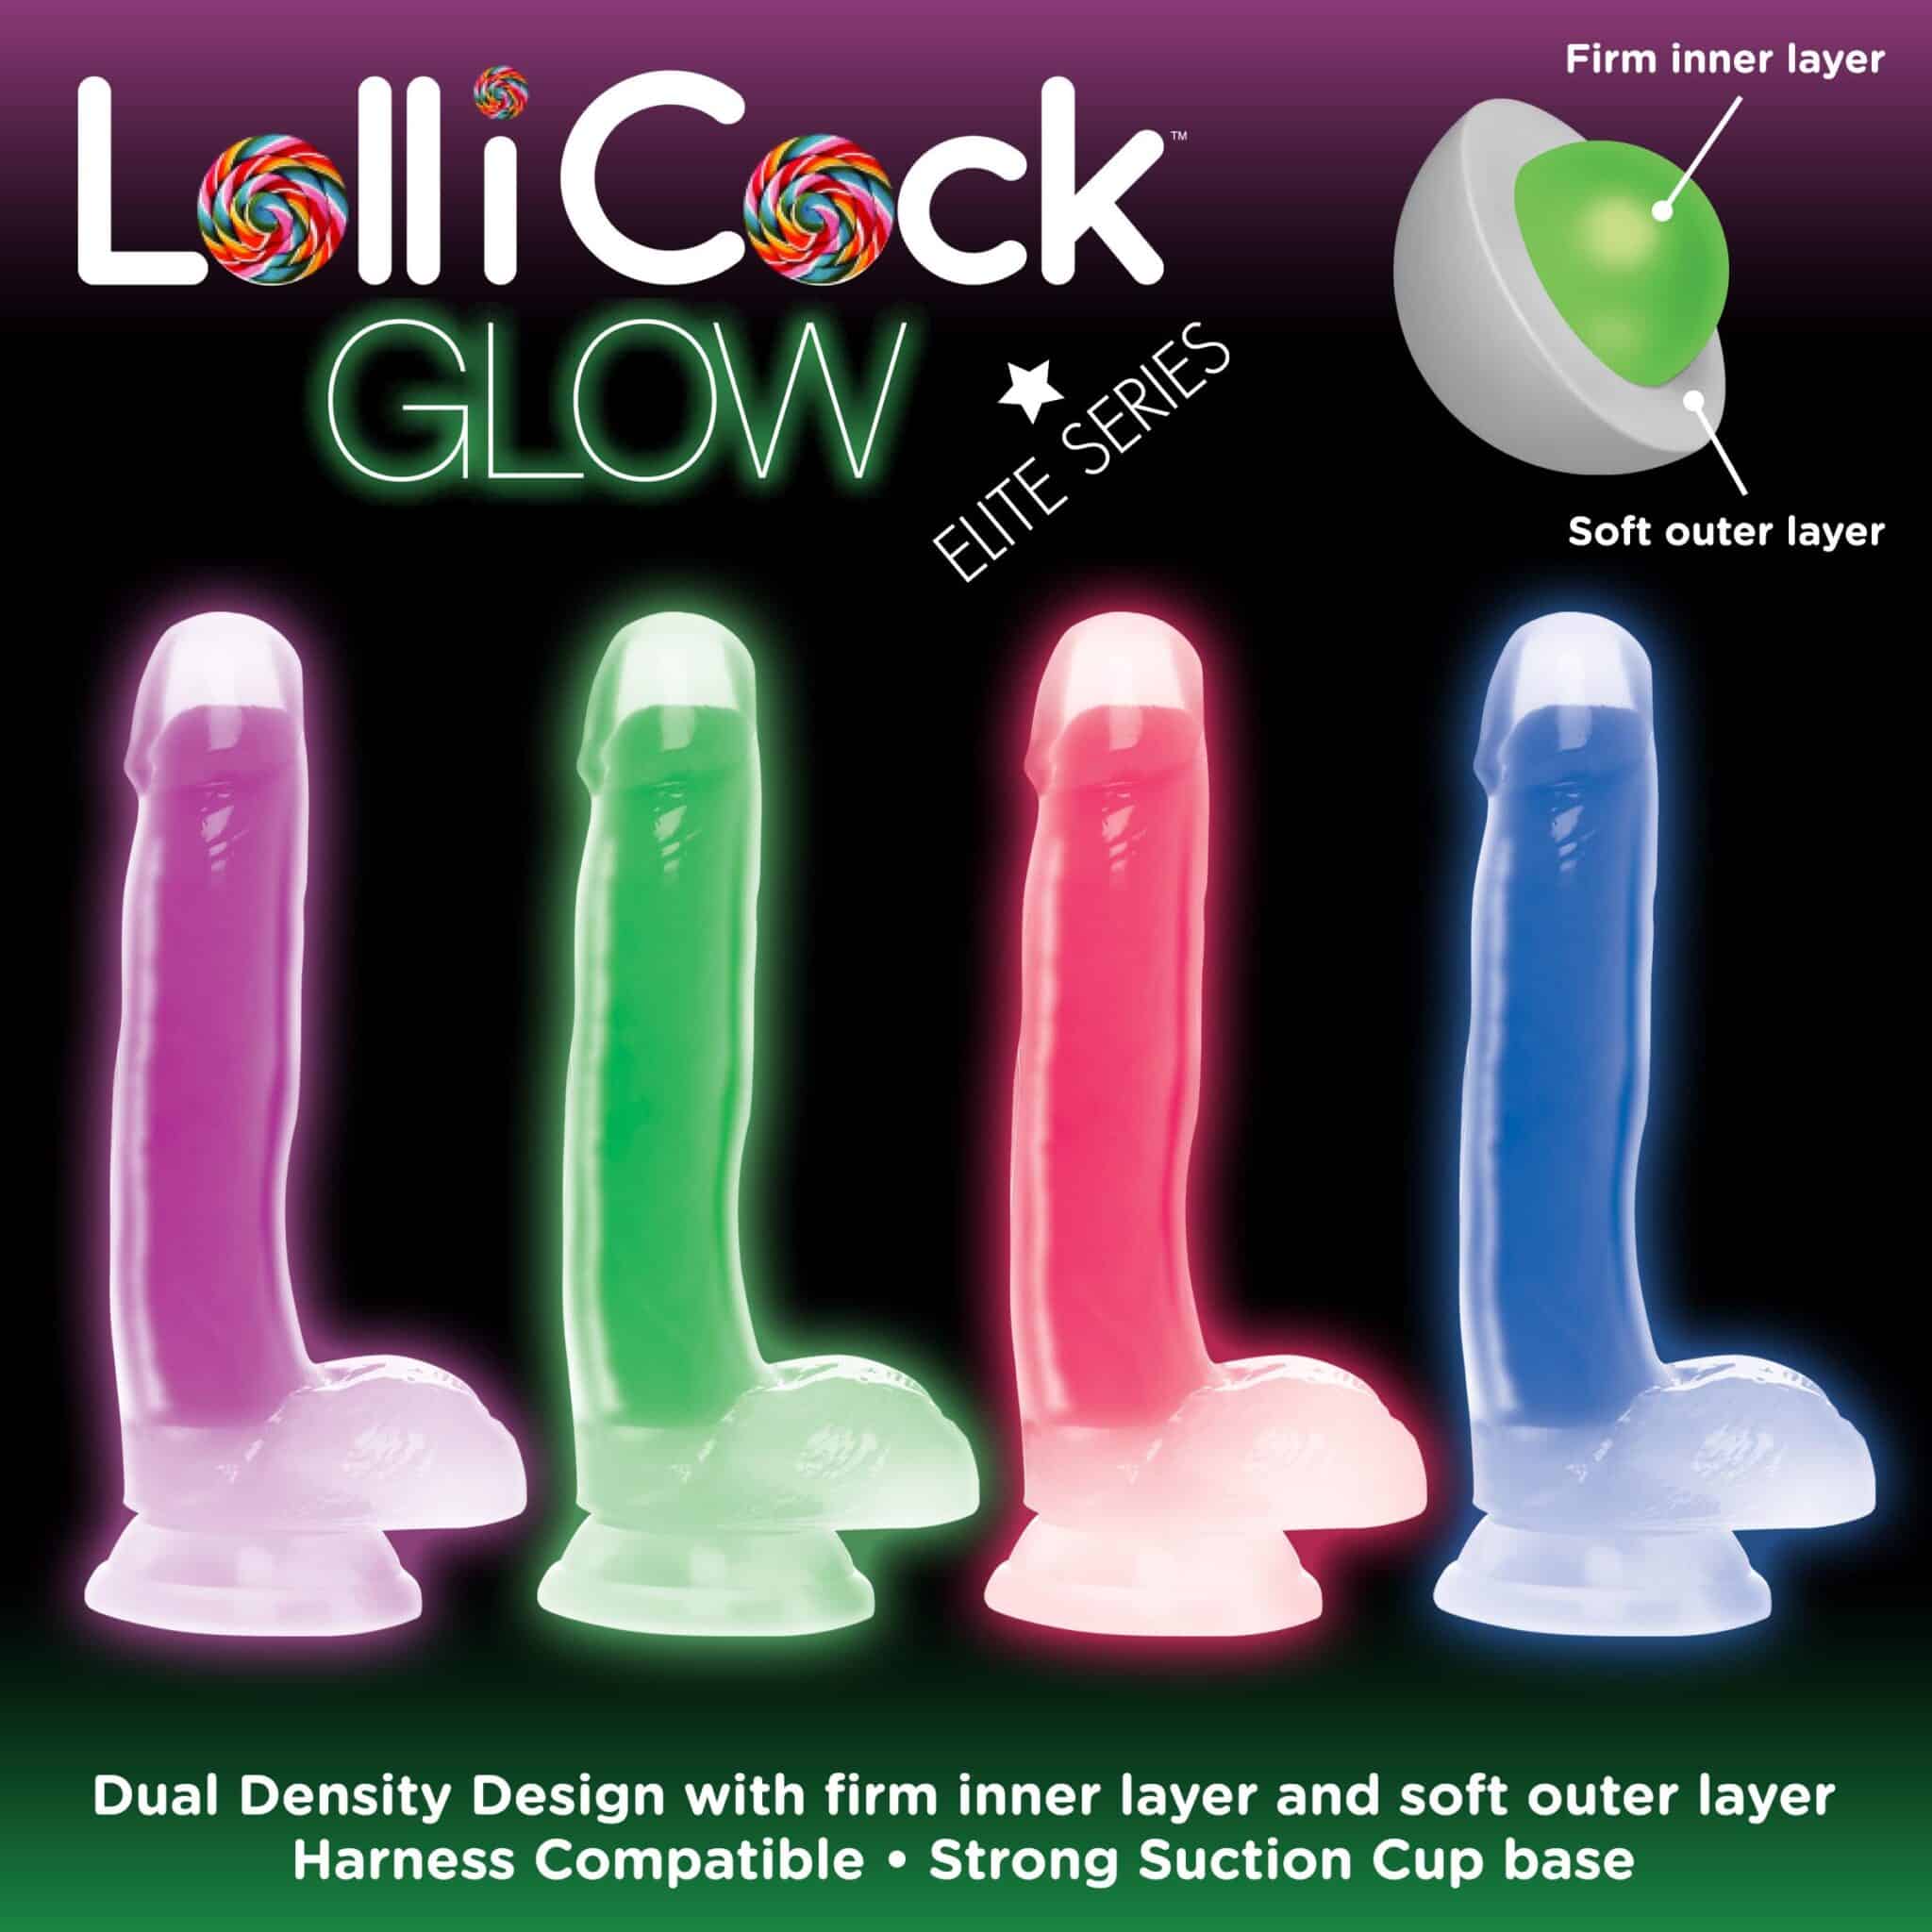 7 Inch Glow-in-the-Dark Silicone Dildo with Balls – Pink